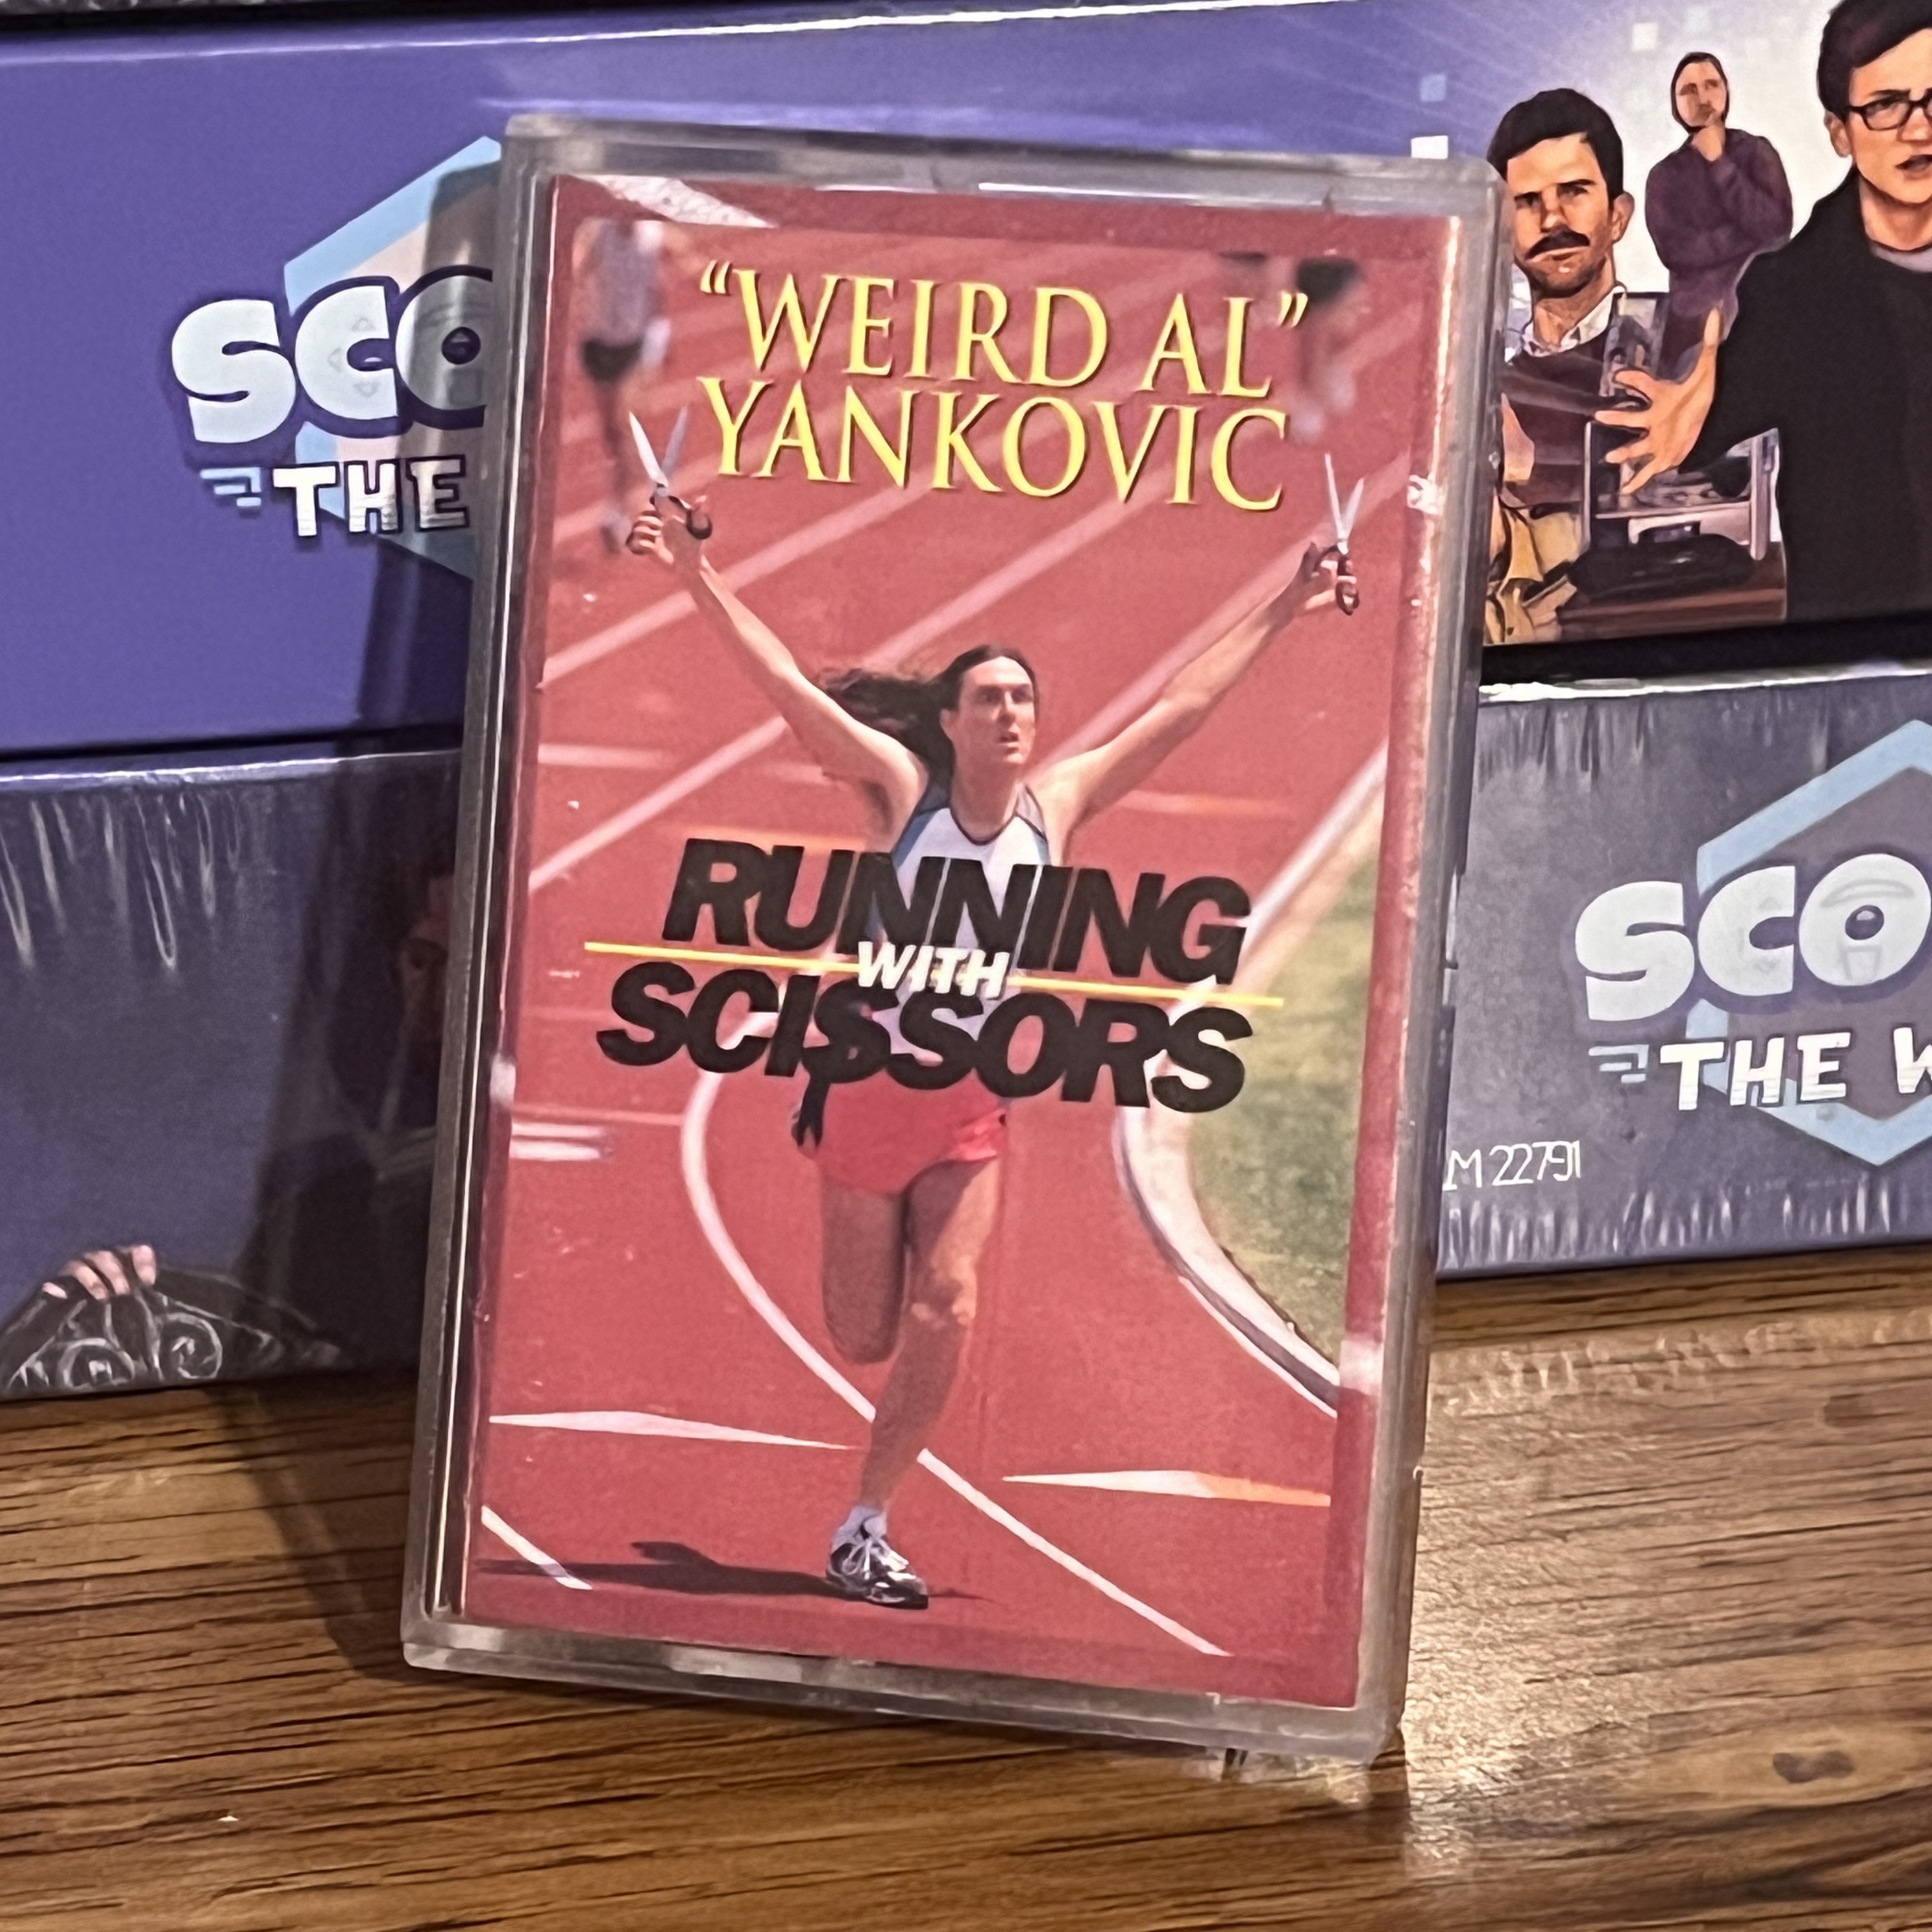 Photograph of a cassette of Running With Scissors by Weird Al Yankovic